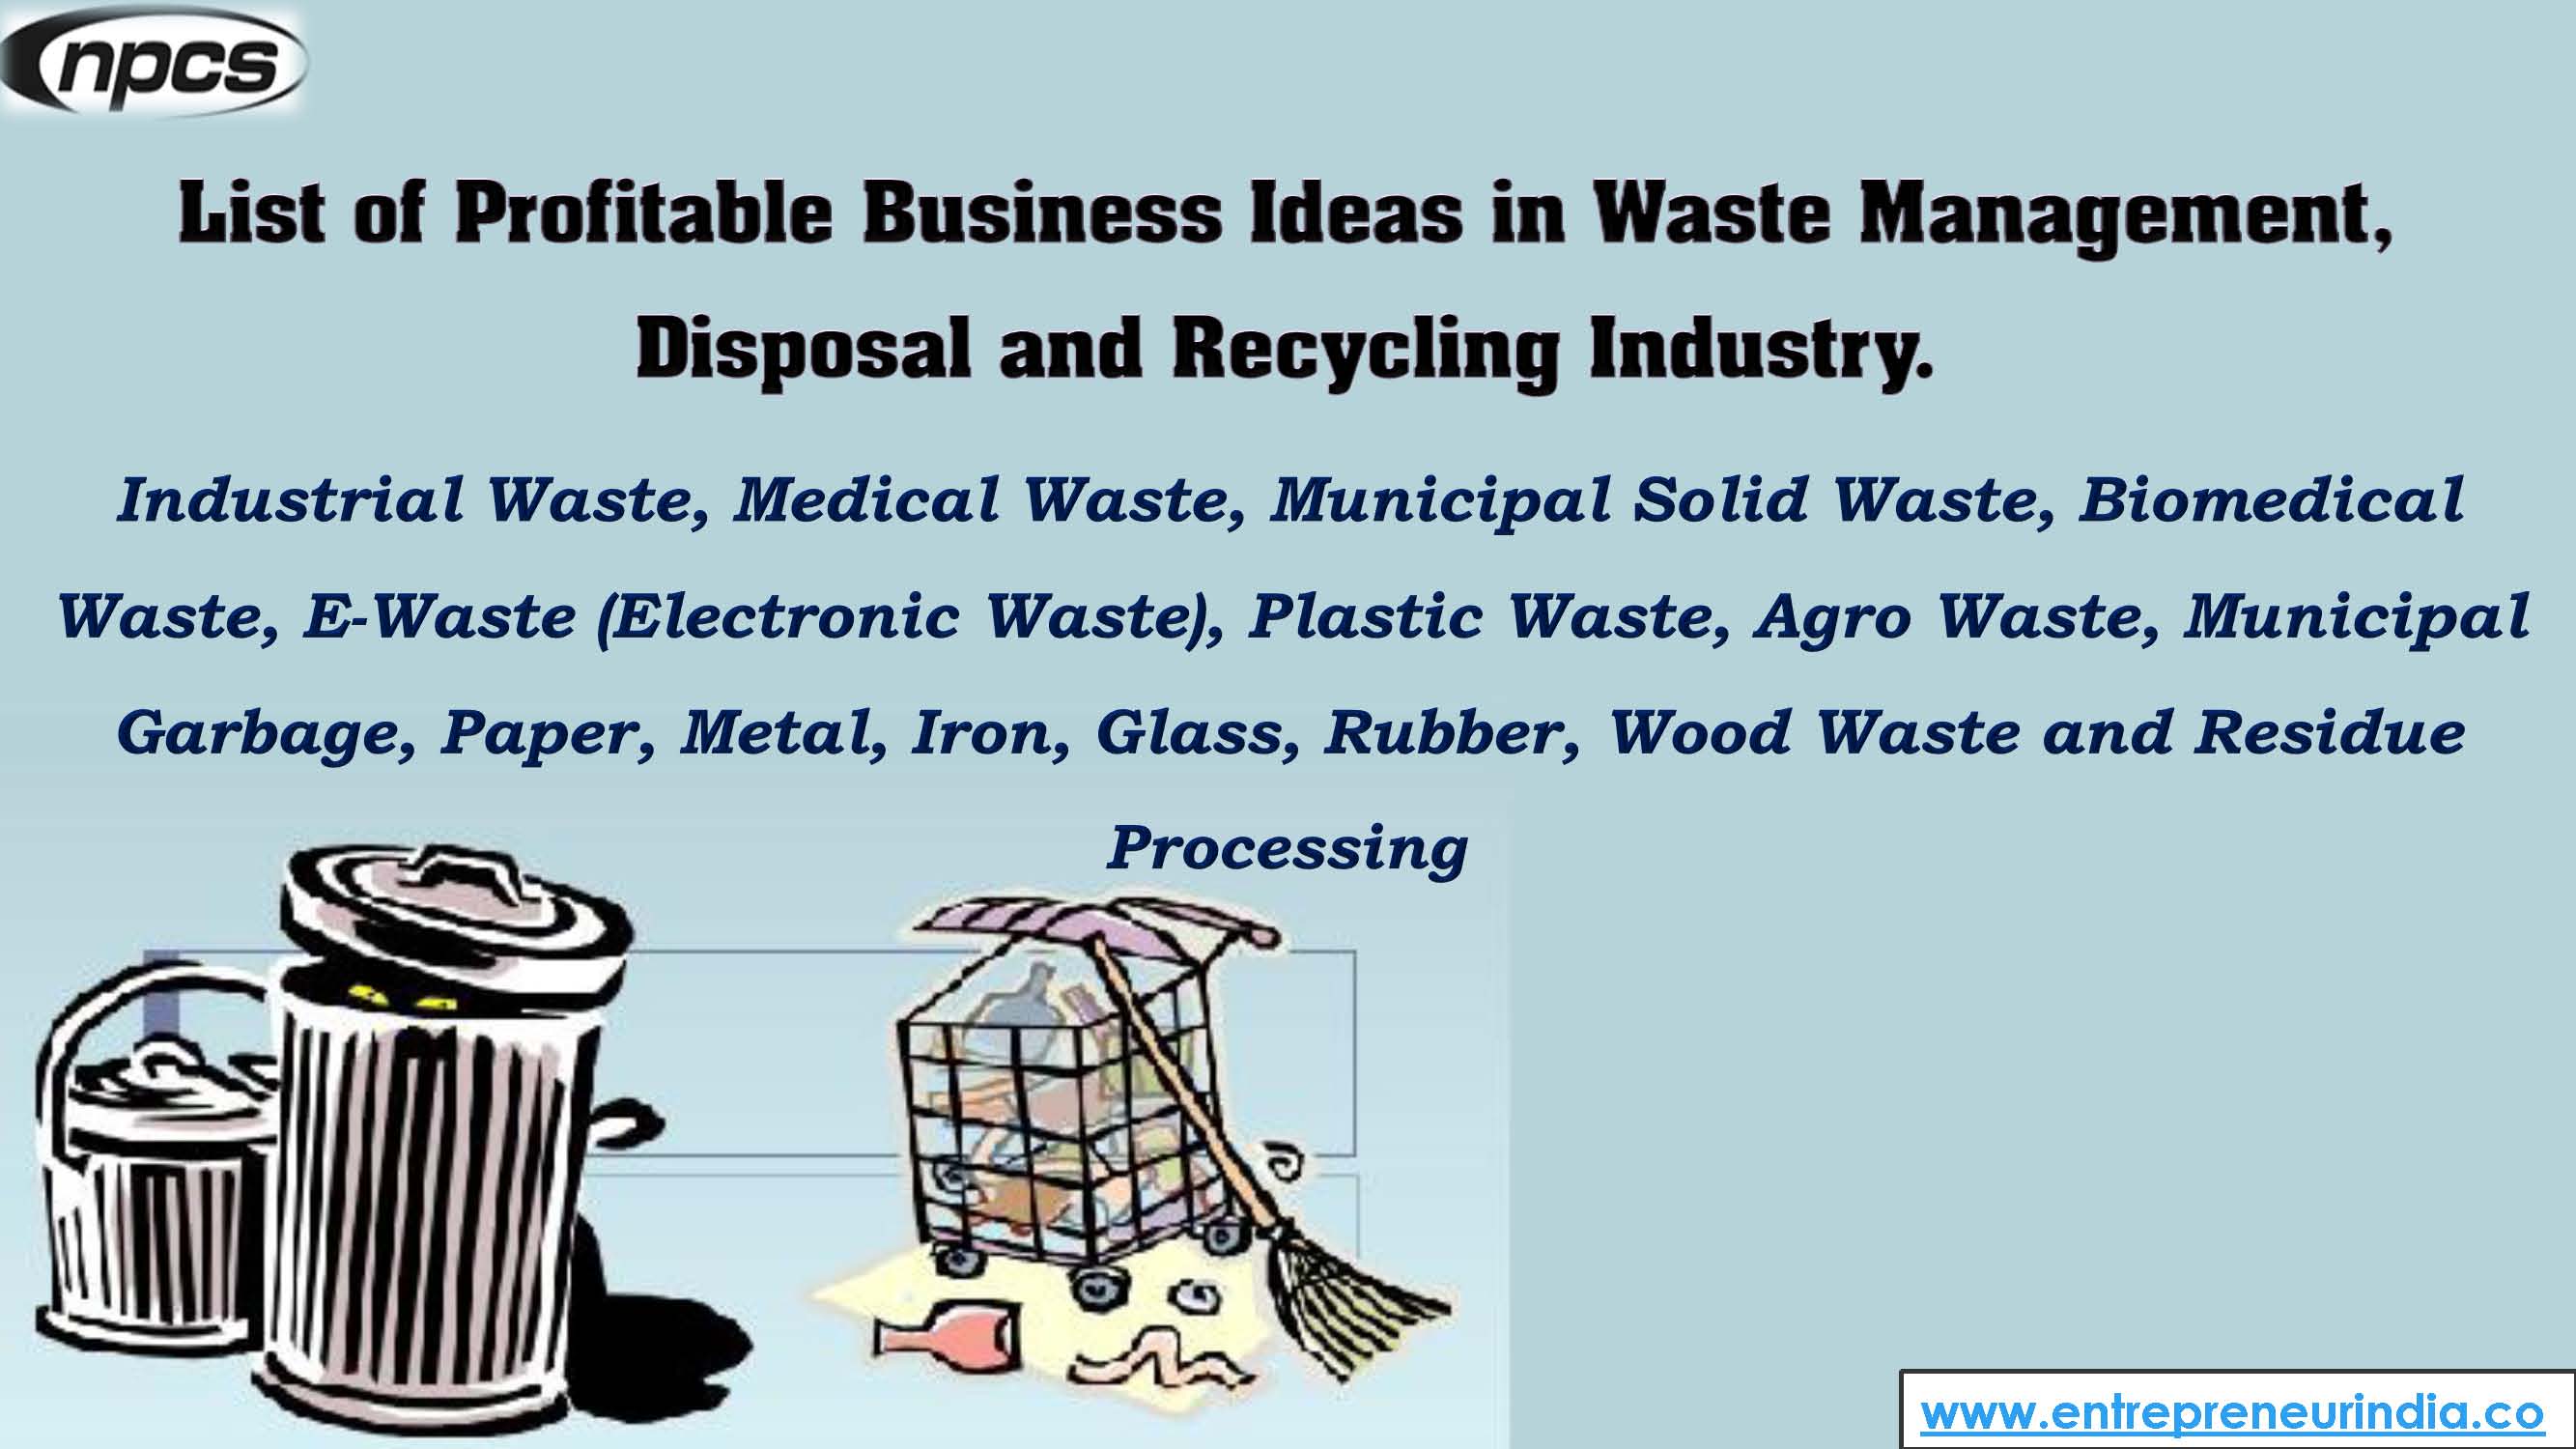 List of Profitable Business Ideas in Waste Management, Disposal and Recycling Industry..jpg